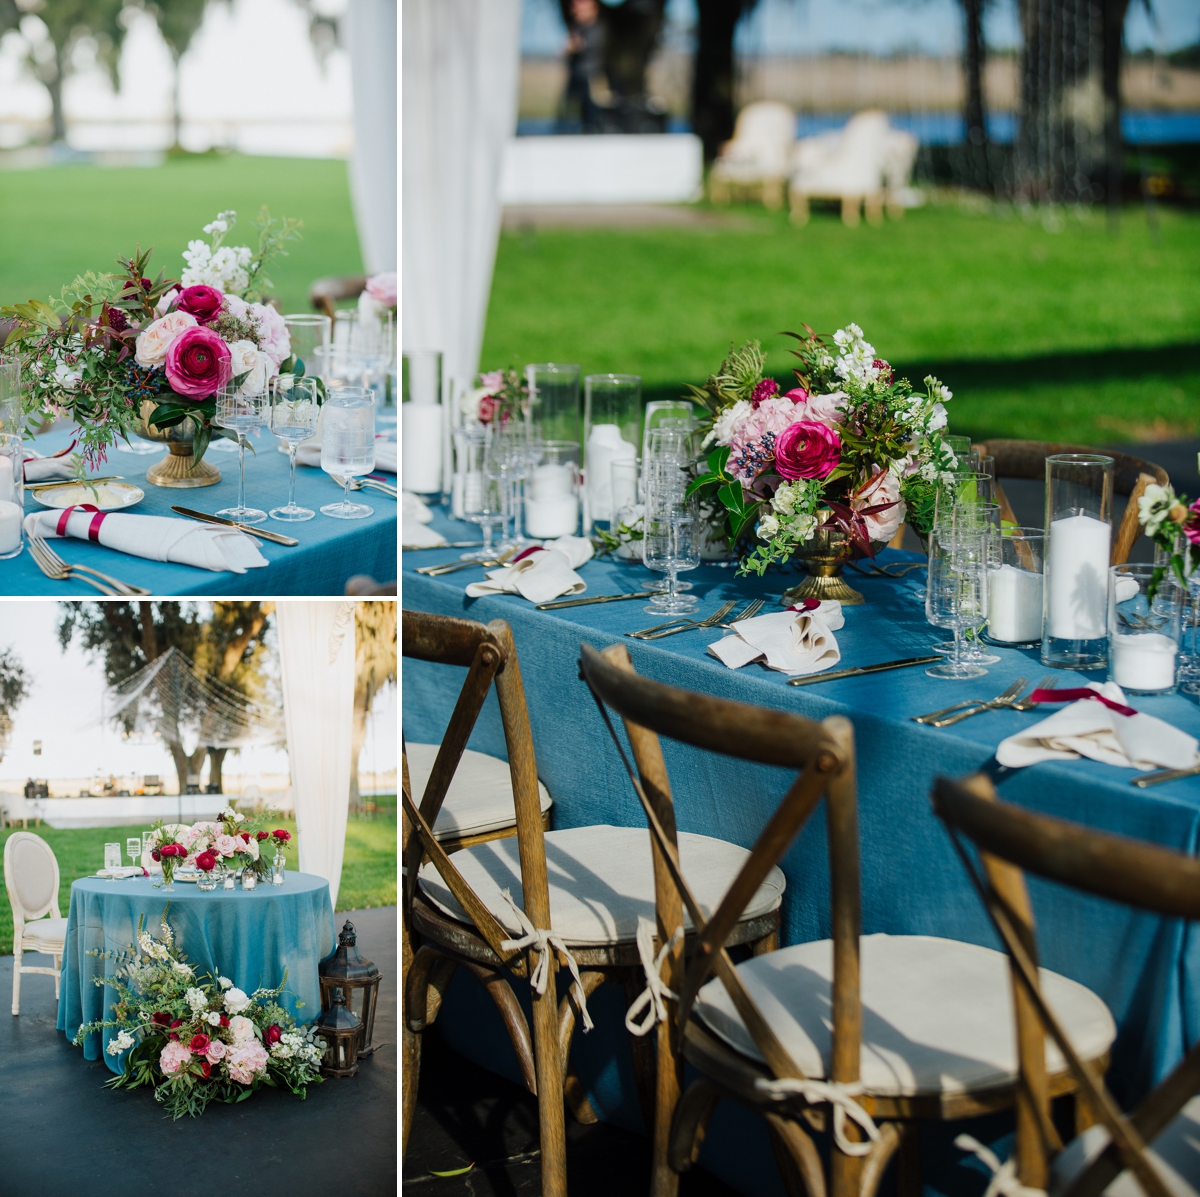 Wedding reception at Ford Field and River Club with tables in blue velvet linens and pink flowers